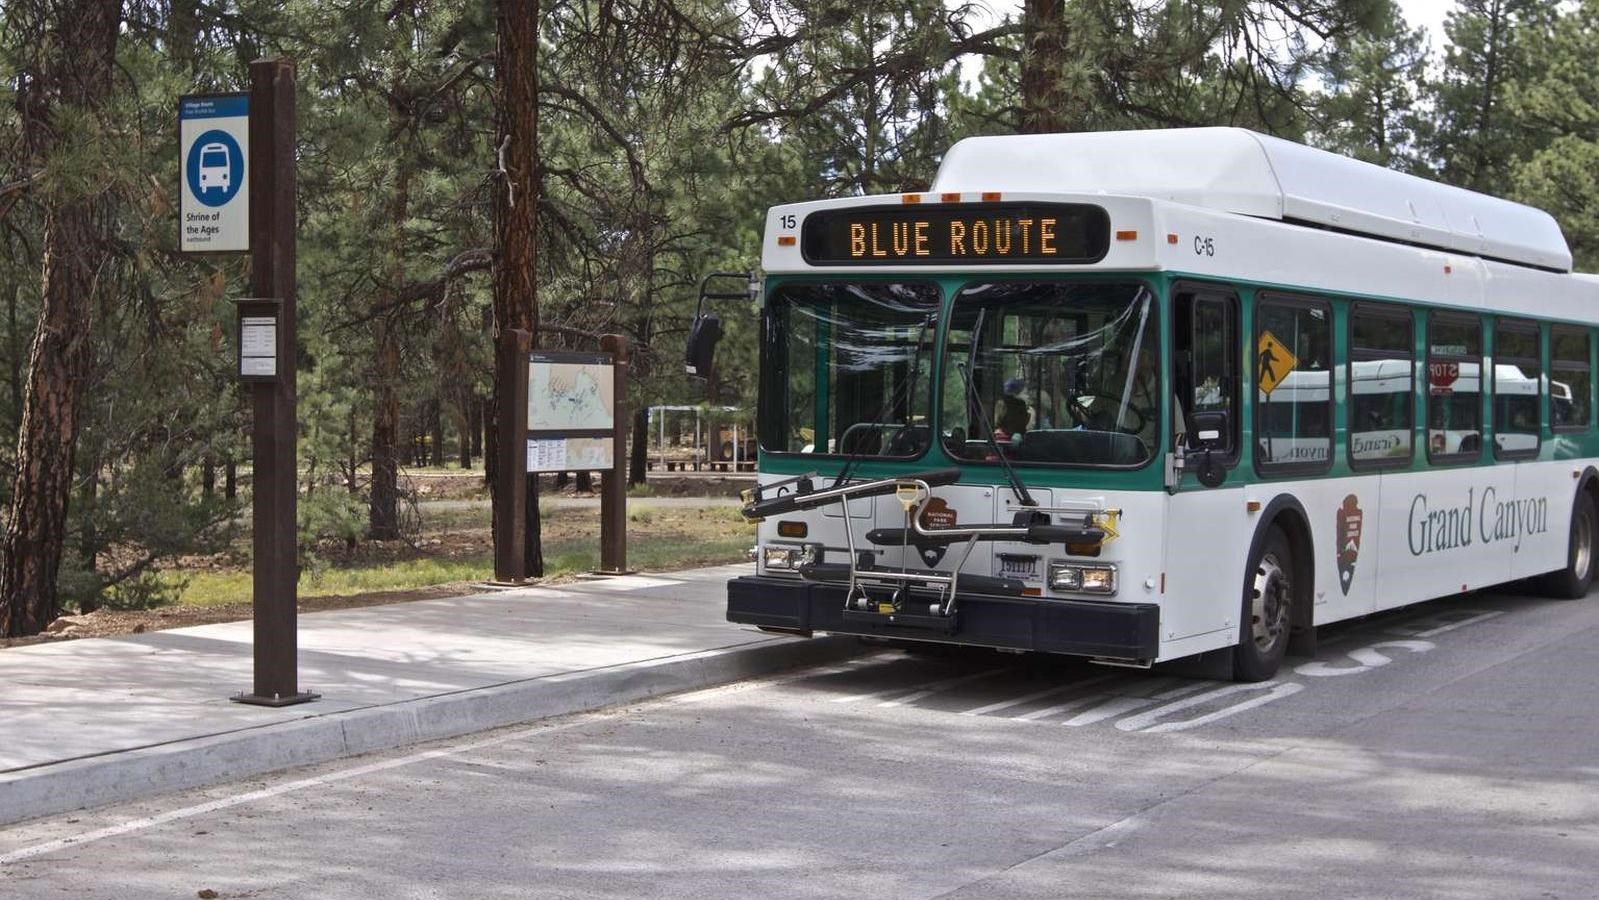 A large white bus pulls up to an open air shuttle stop in front of large pine trees